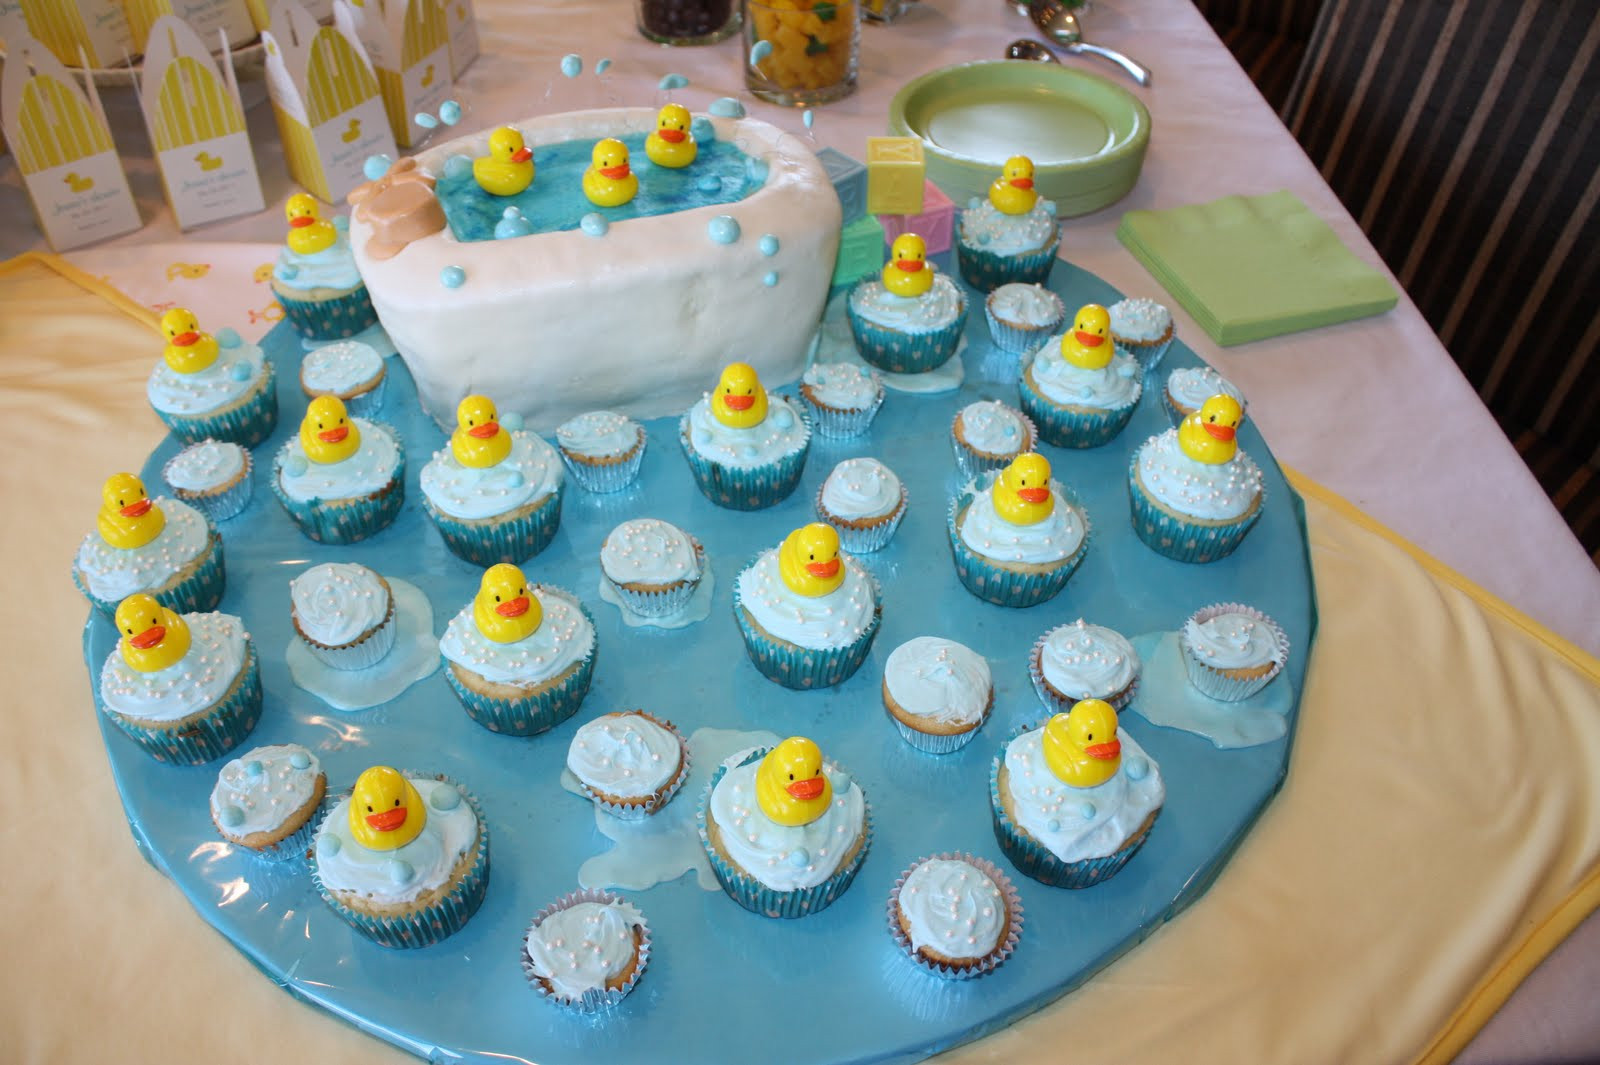 Cute Baby Shower Decoration Ideas
 70 Baby Shower Cakes and Cupcakes Ideas